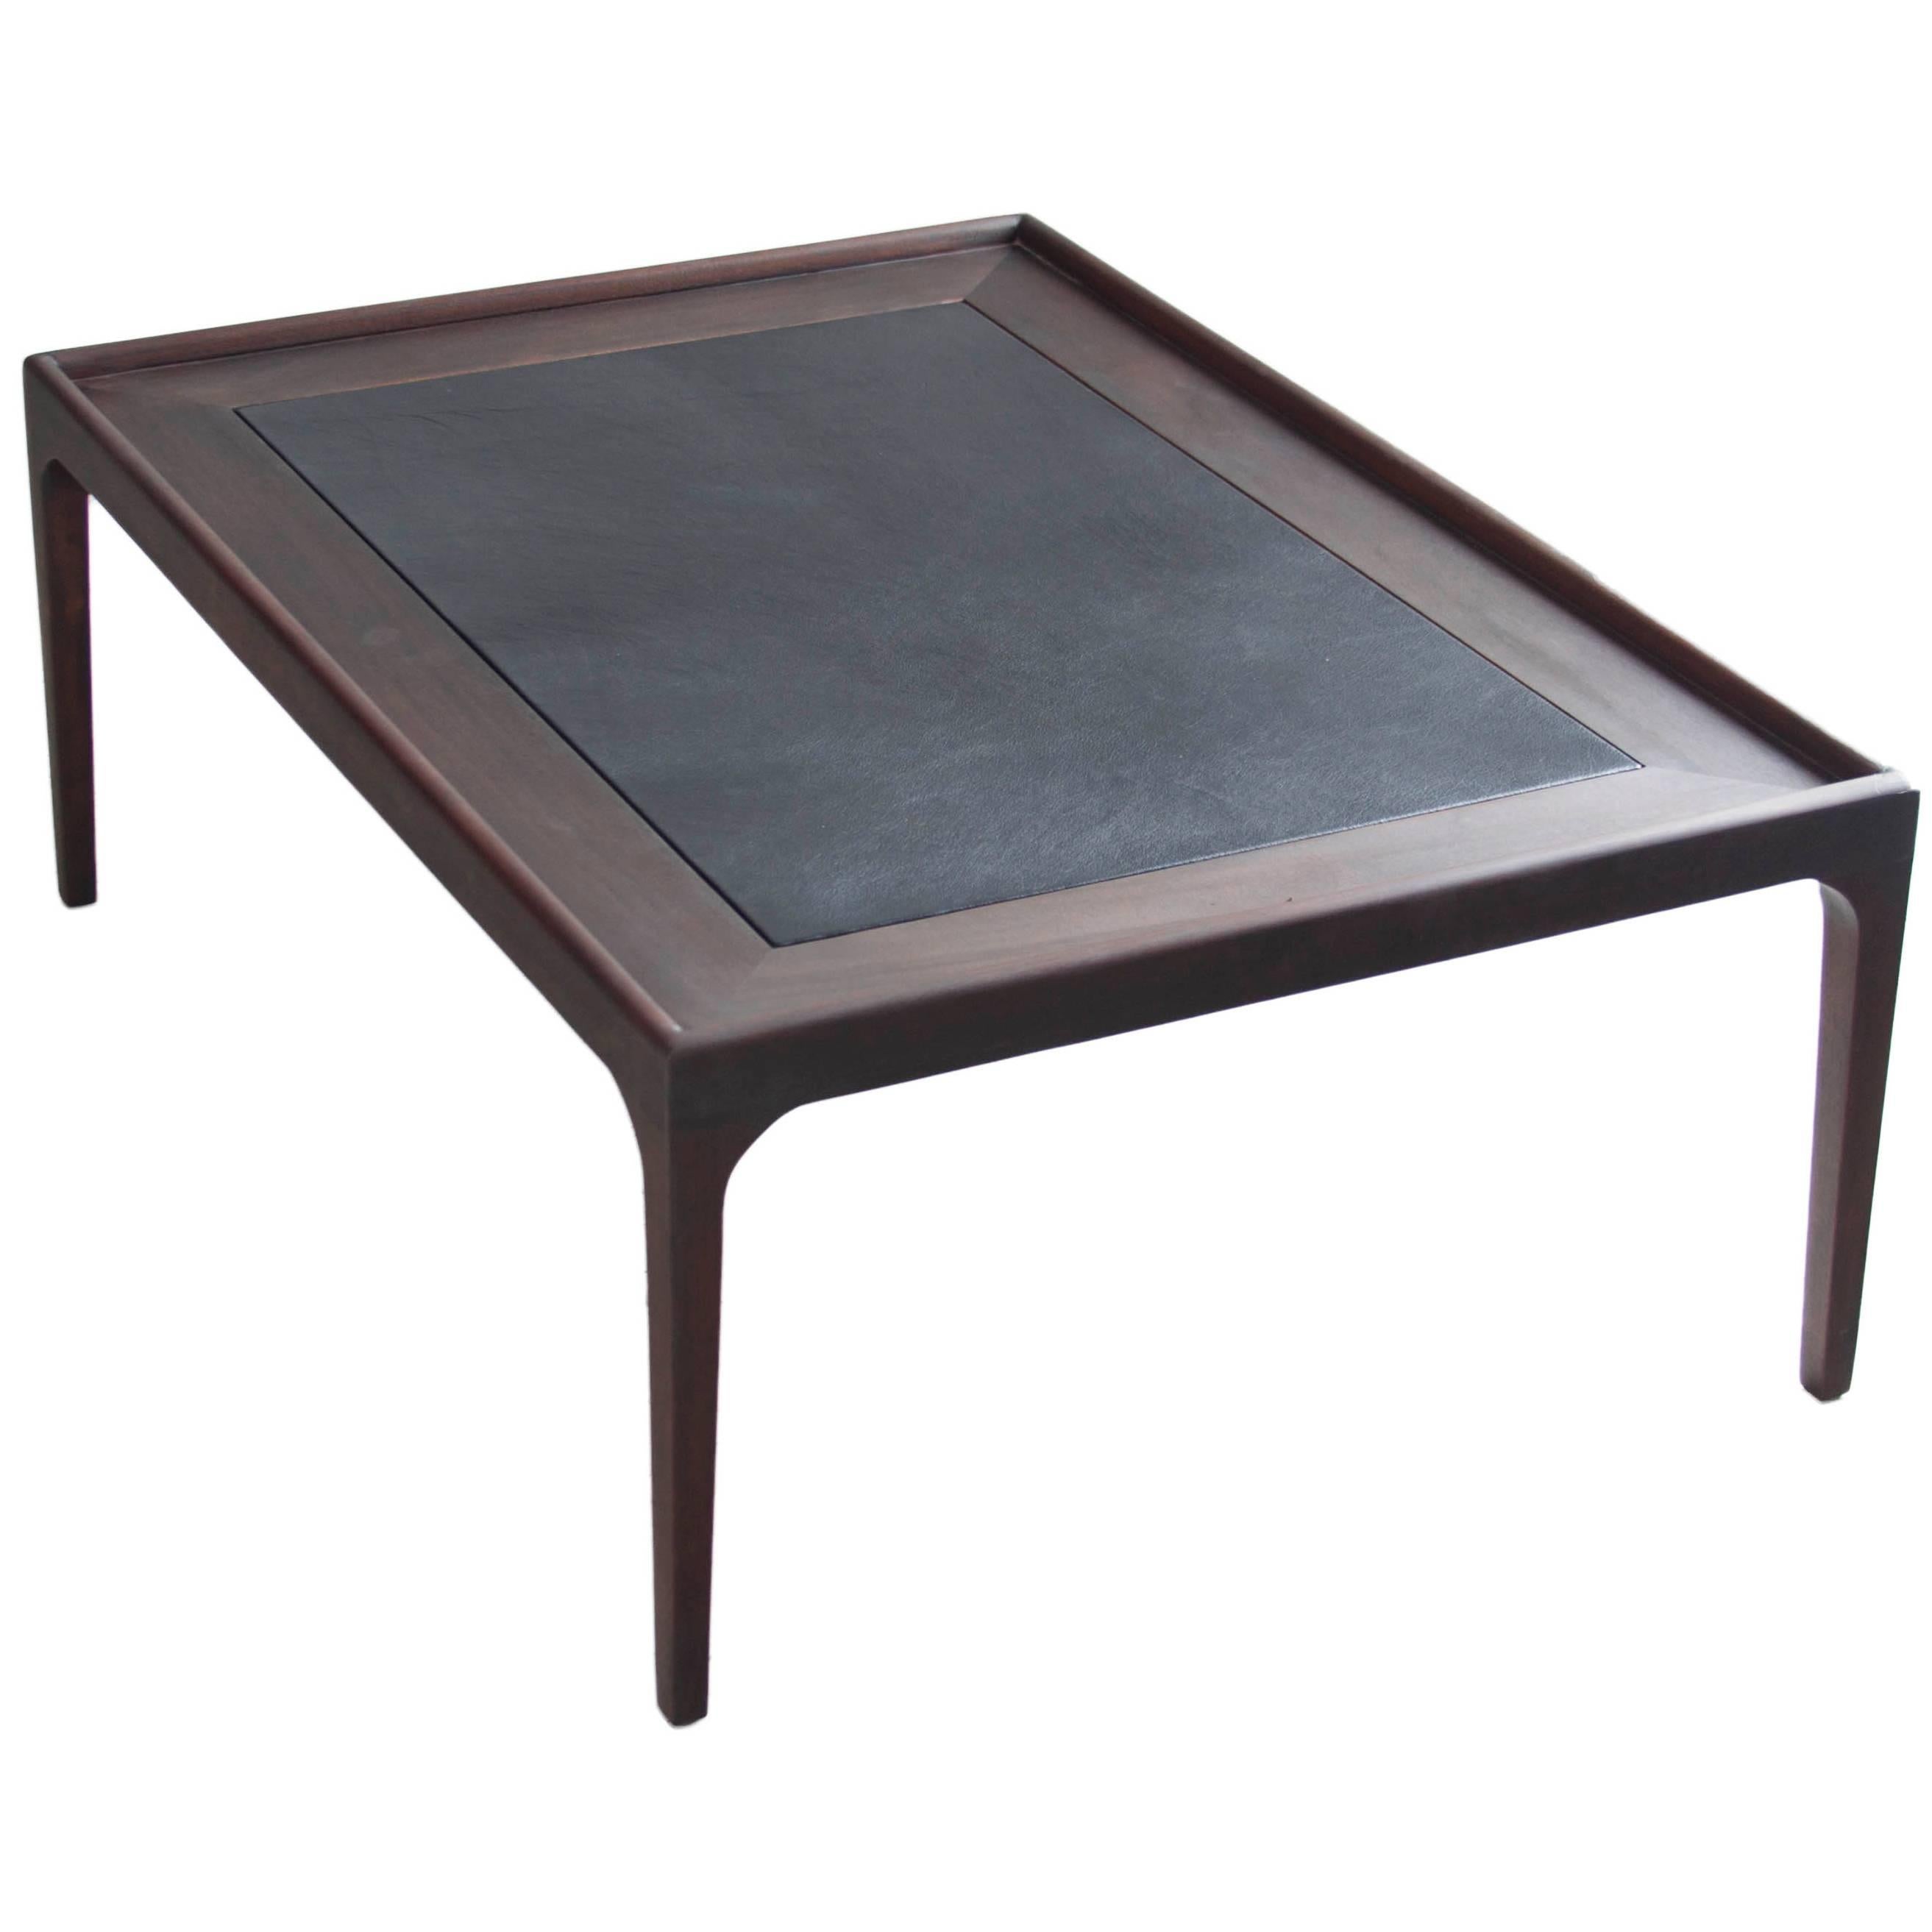 Mid-Century Mahogany Coffee Table with inset Black Leather Top